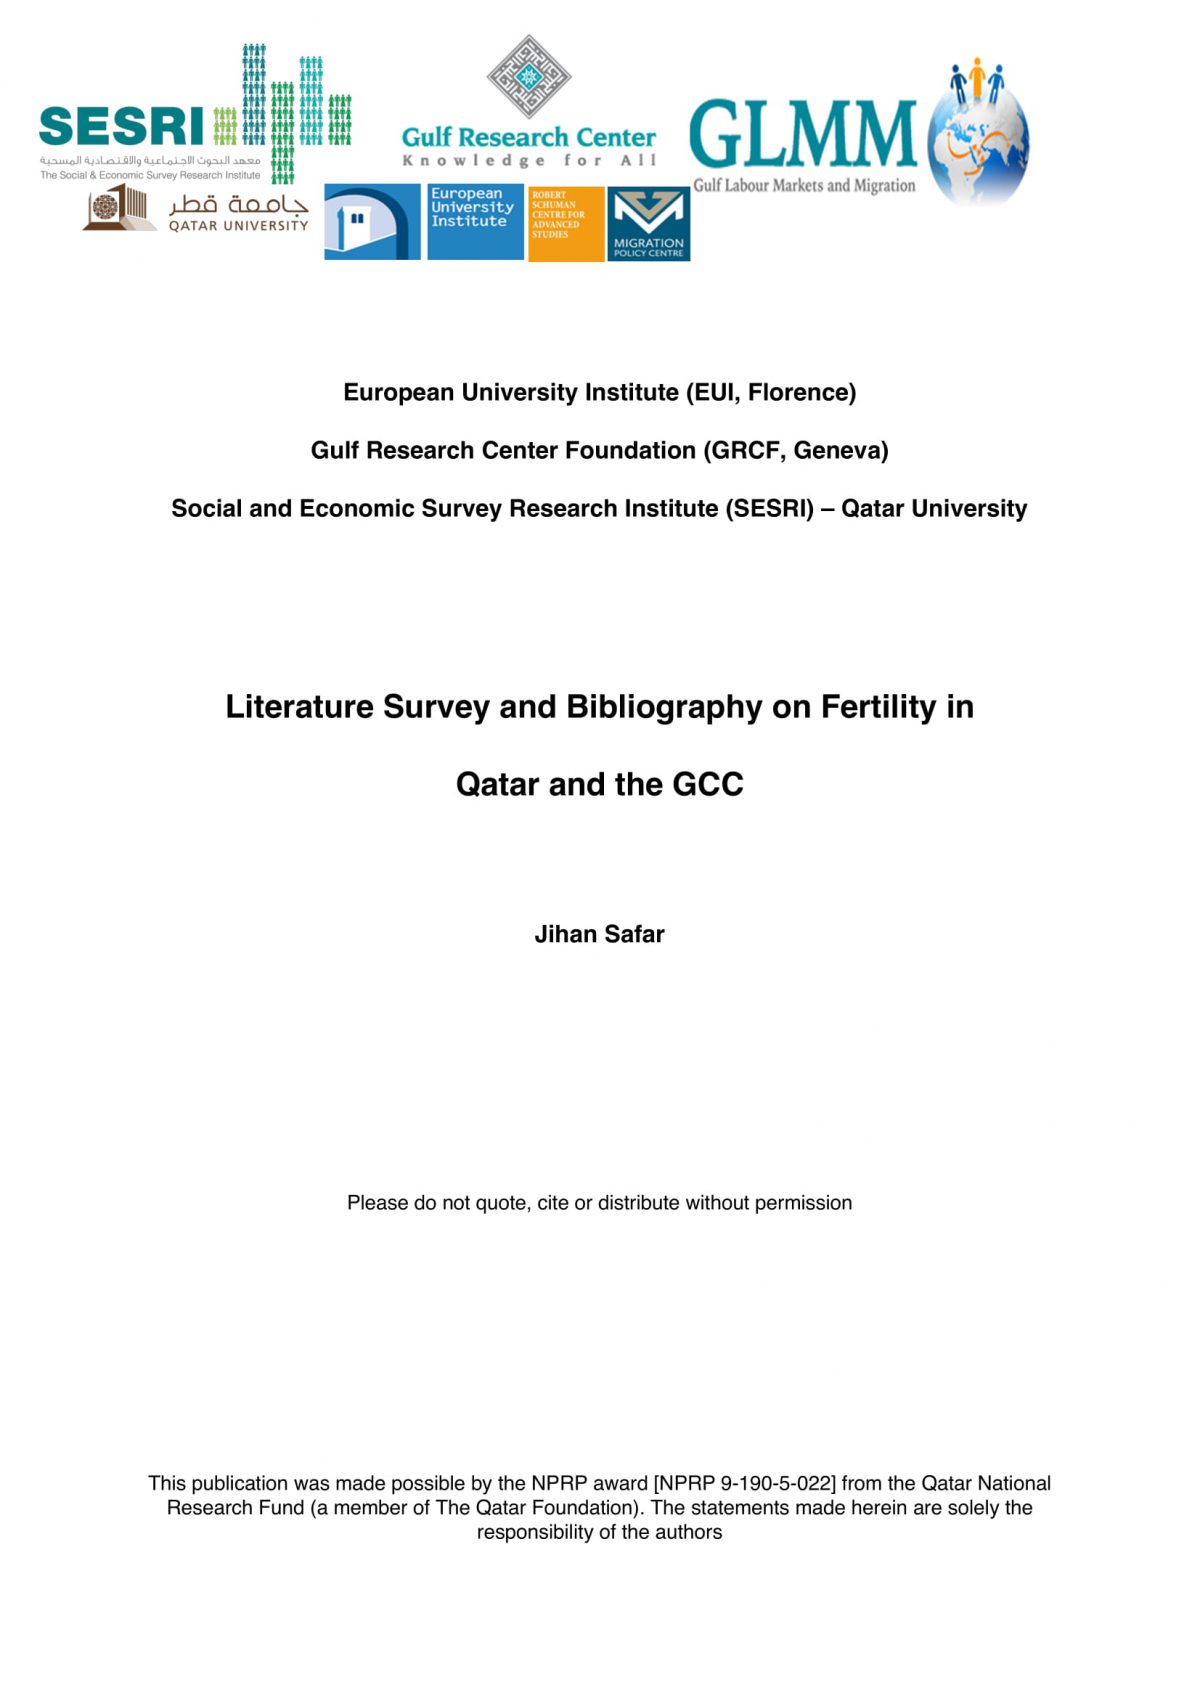 Literature Survey and Bibliography on Fertility in Qatar and the GCC